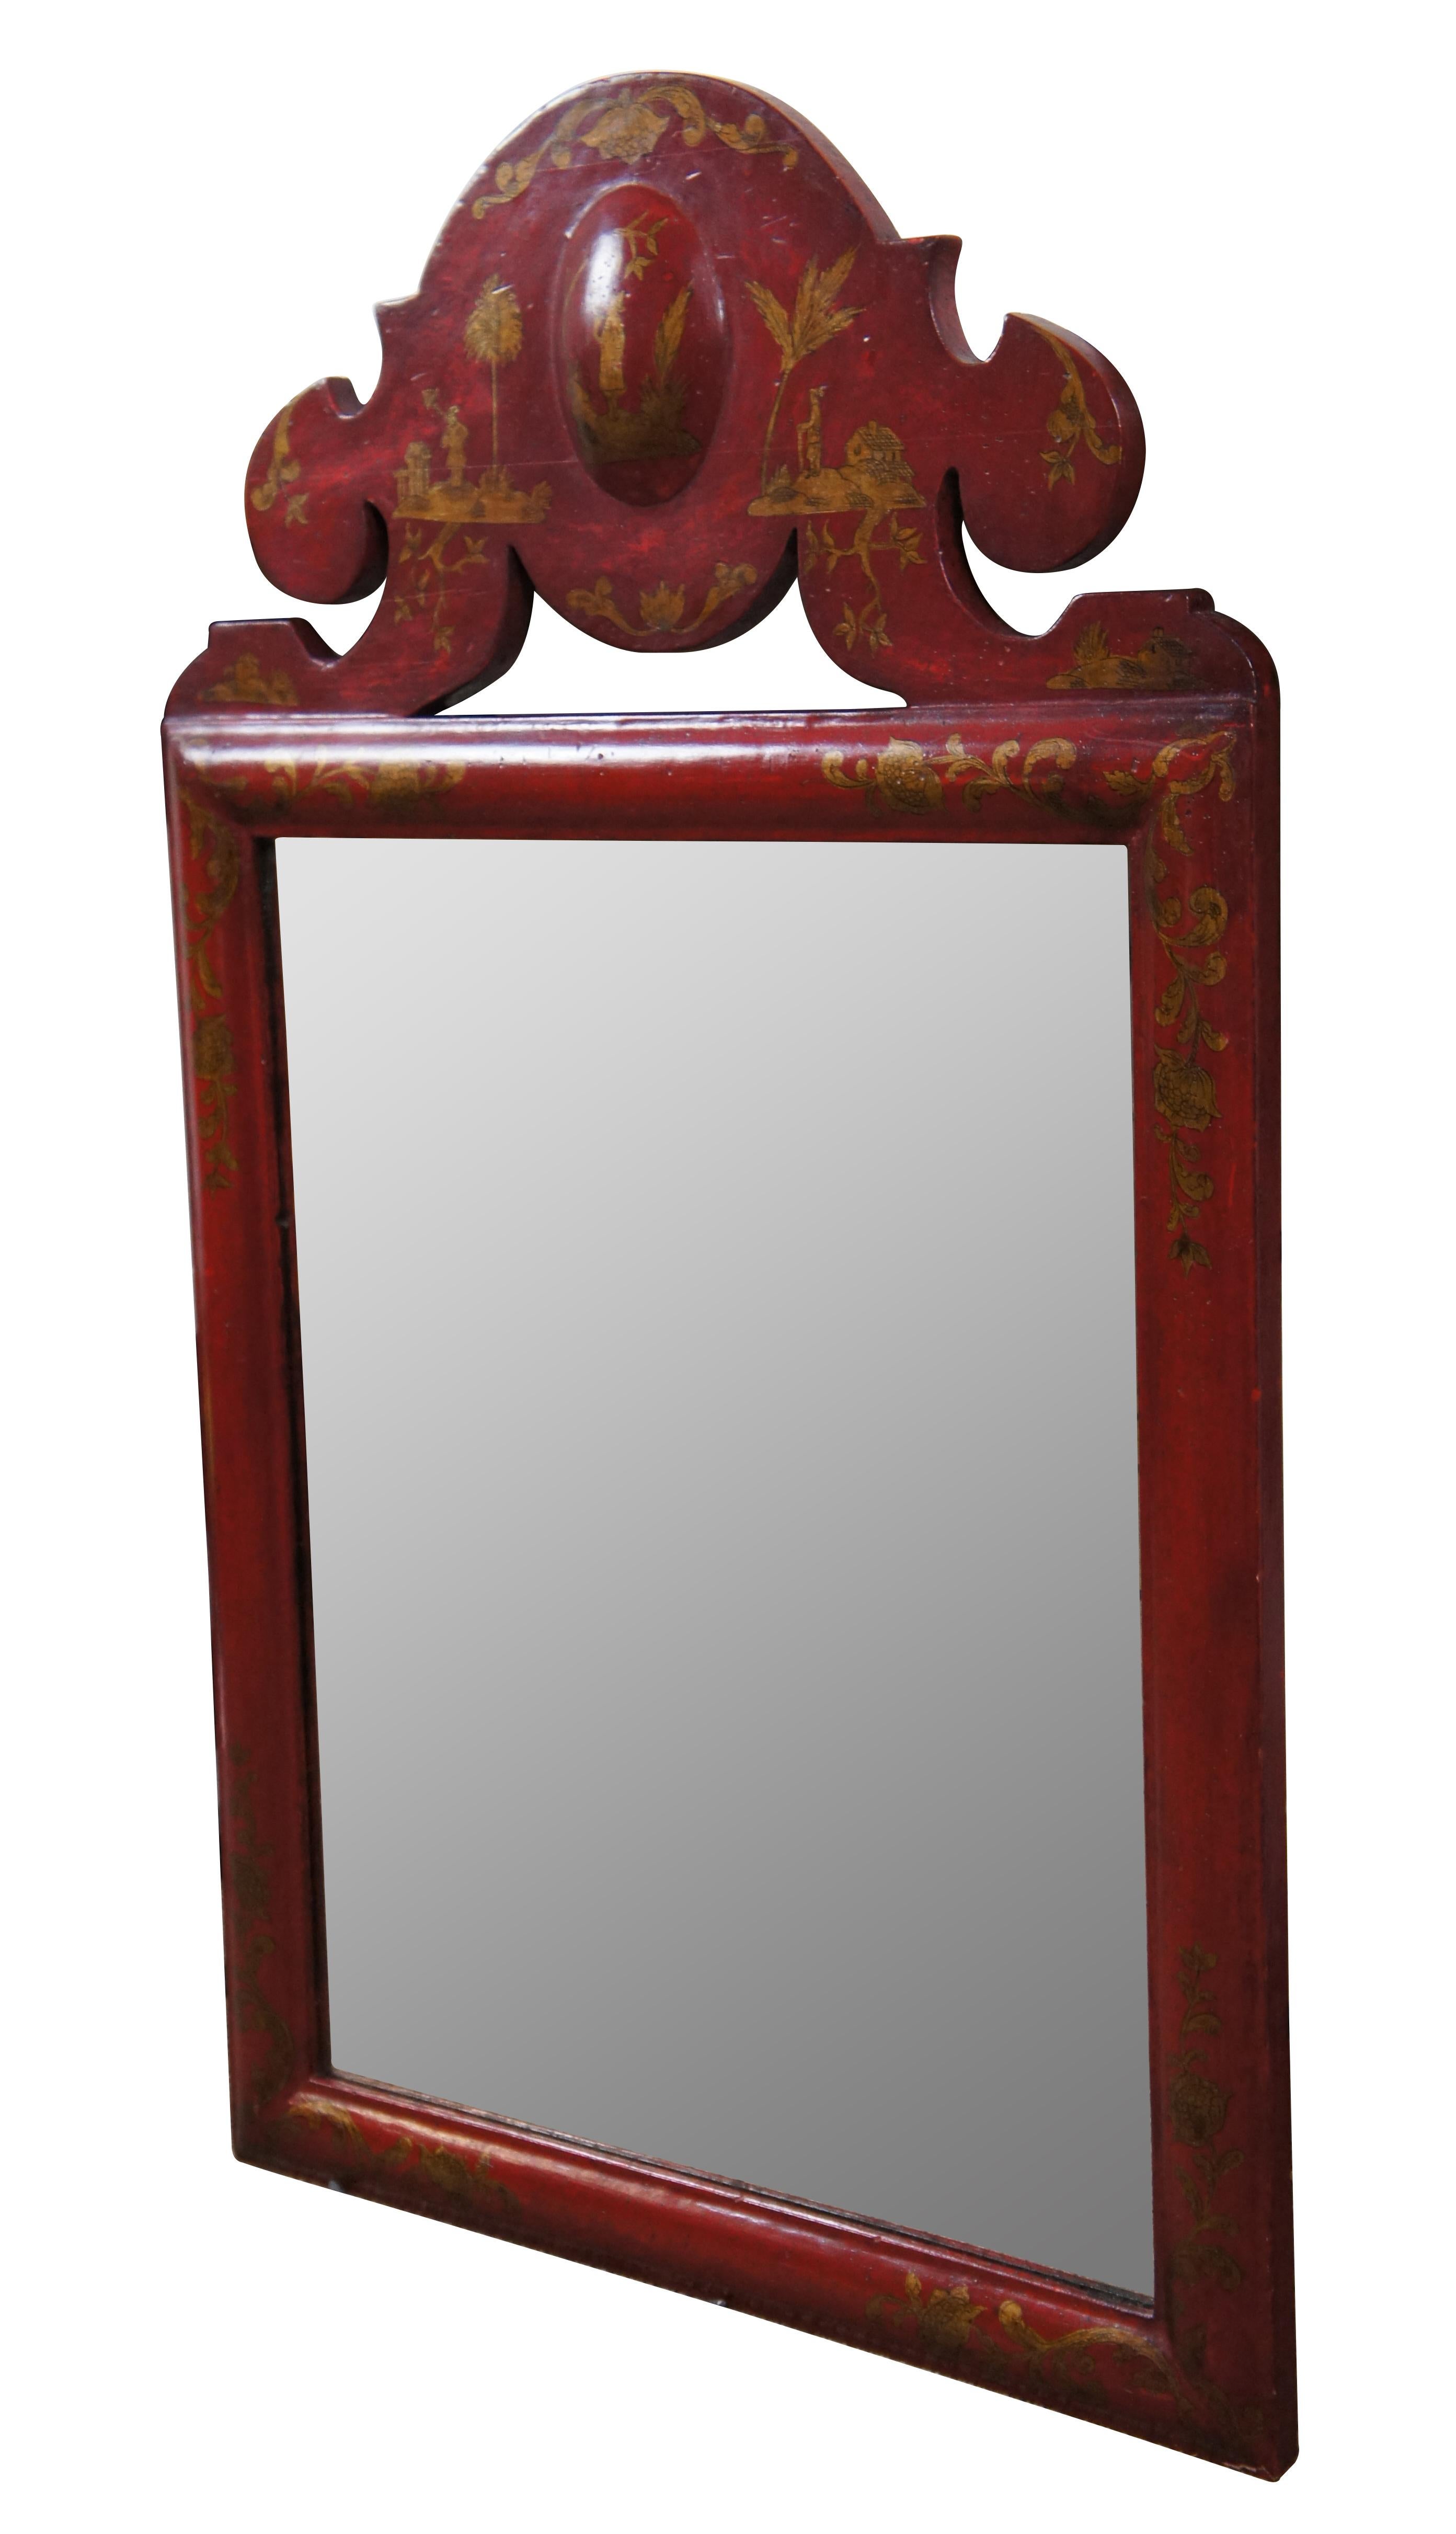 Vintage William & Mary / chinoiserie wall mirror japanned in scarlet with gold painted decoration, rectangular in shape with a pierced arched pediment. Marked Chapman Made in Spain on reverse.

22.5” x 1.25” x 38” / Mirror - 18” x 23.5” (Width x